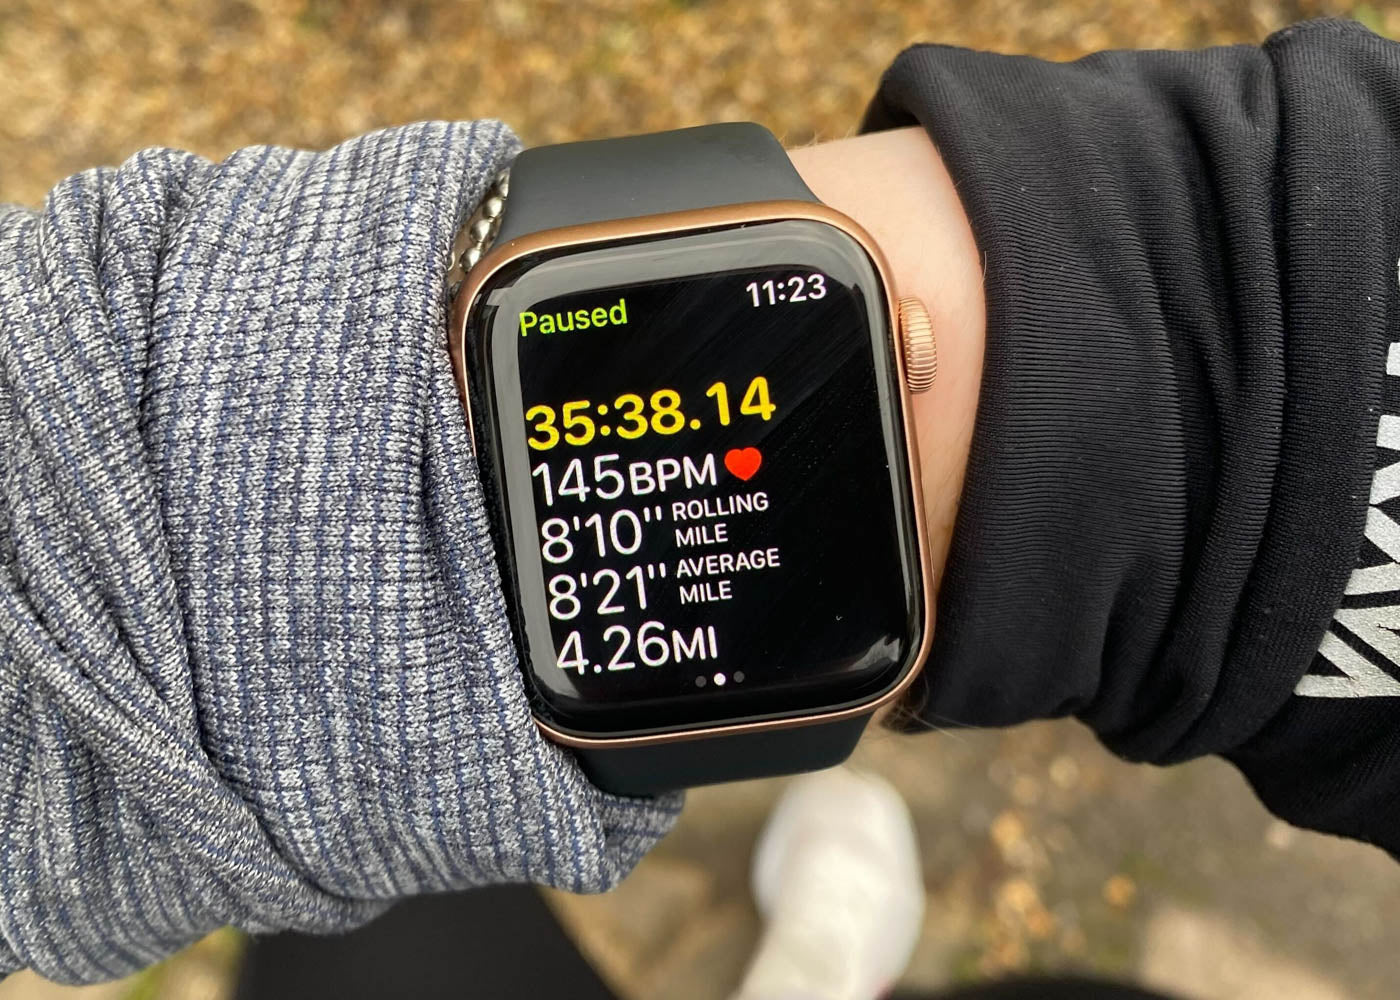 Apple Watch running functionality